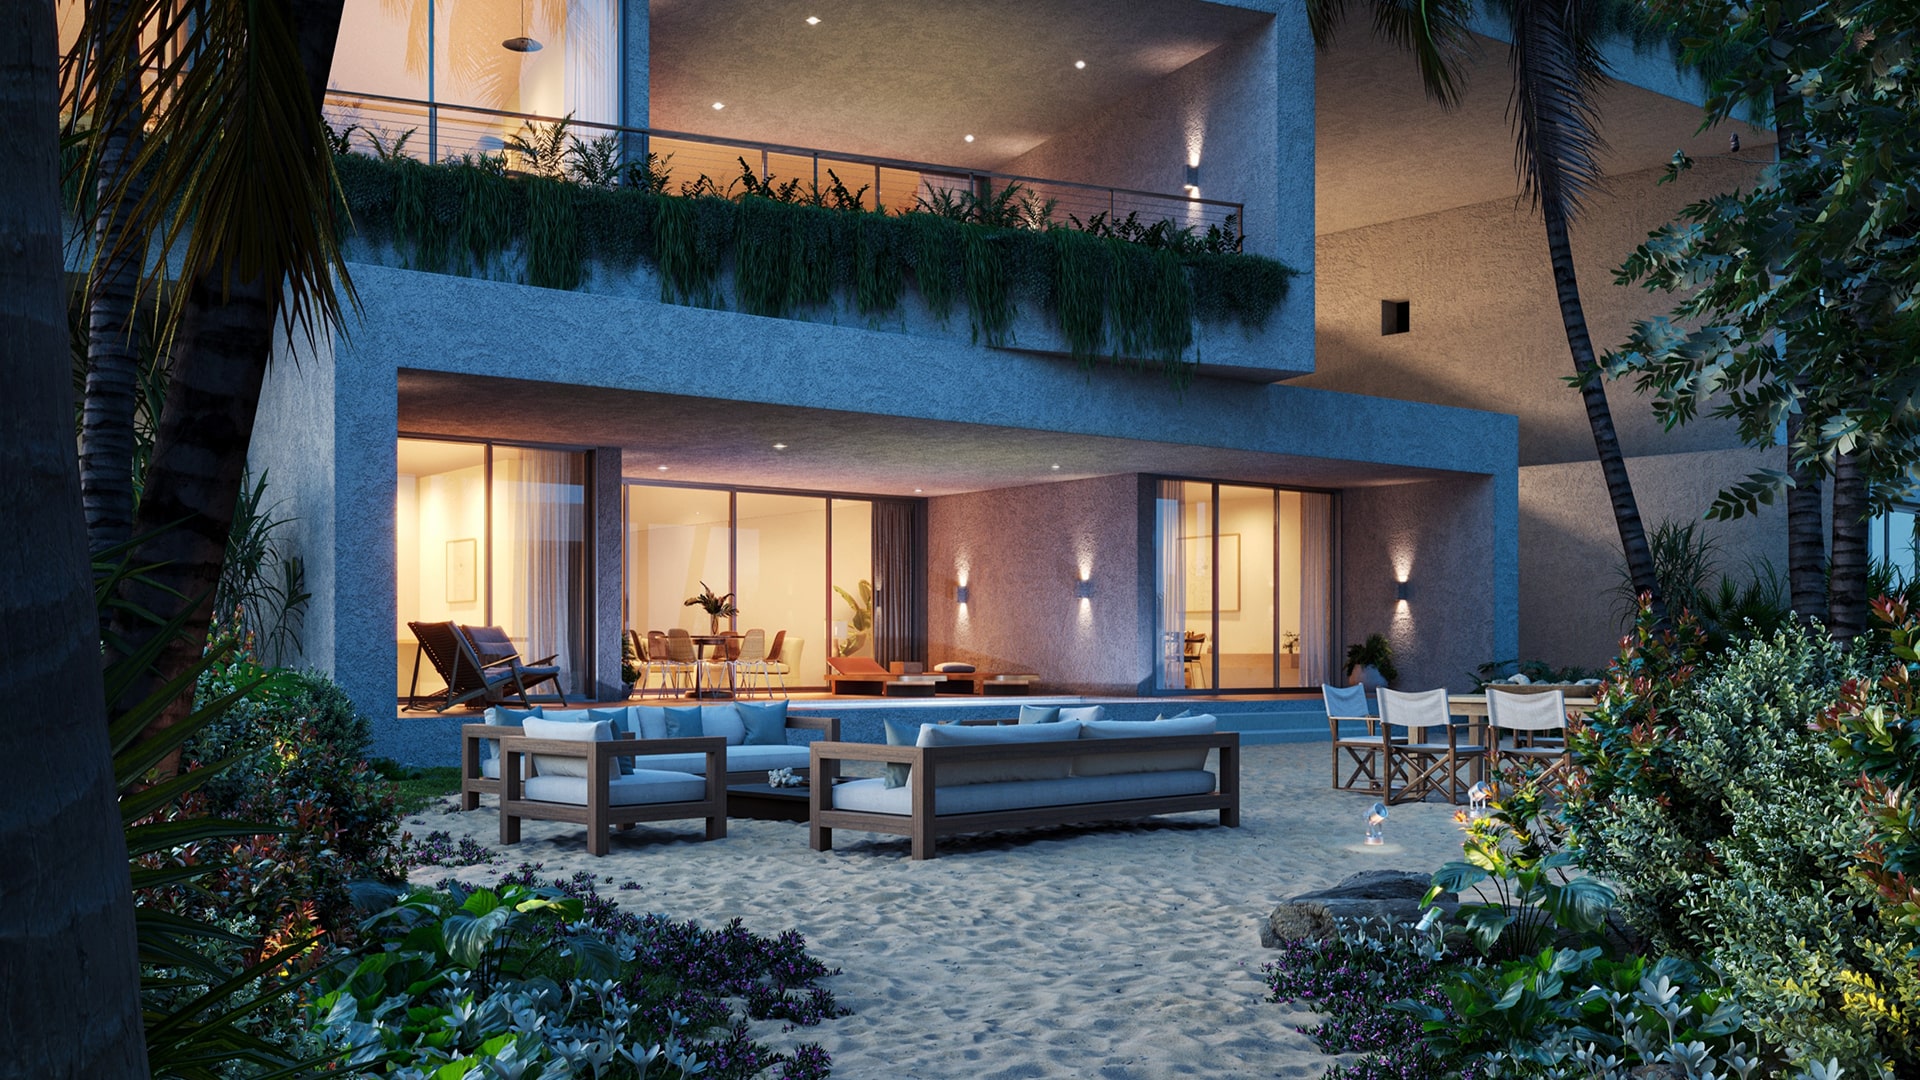 Inside Tropicalia: Four Seasons Private Residences in the Dominican Republic